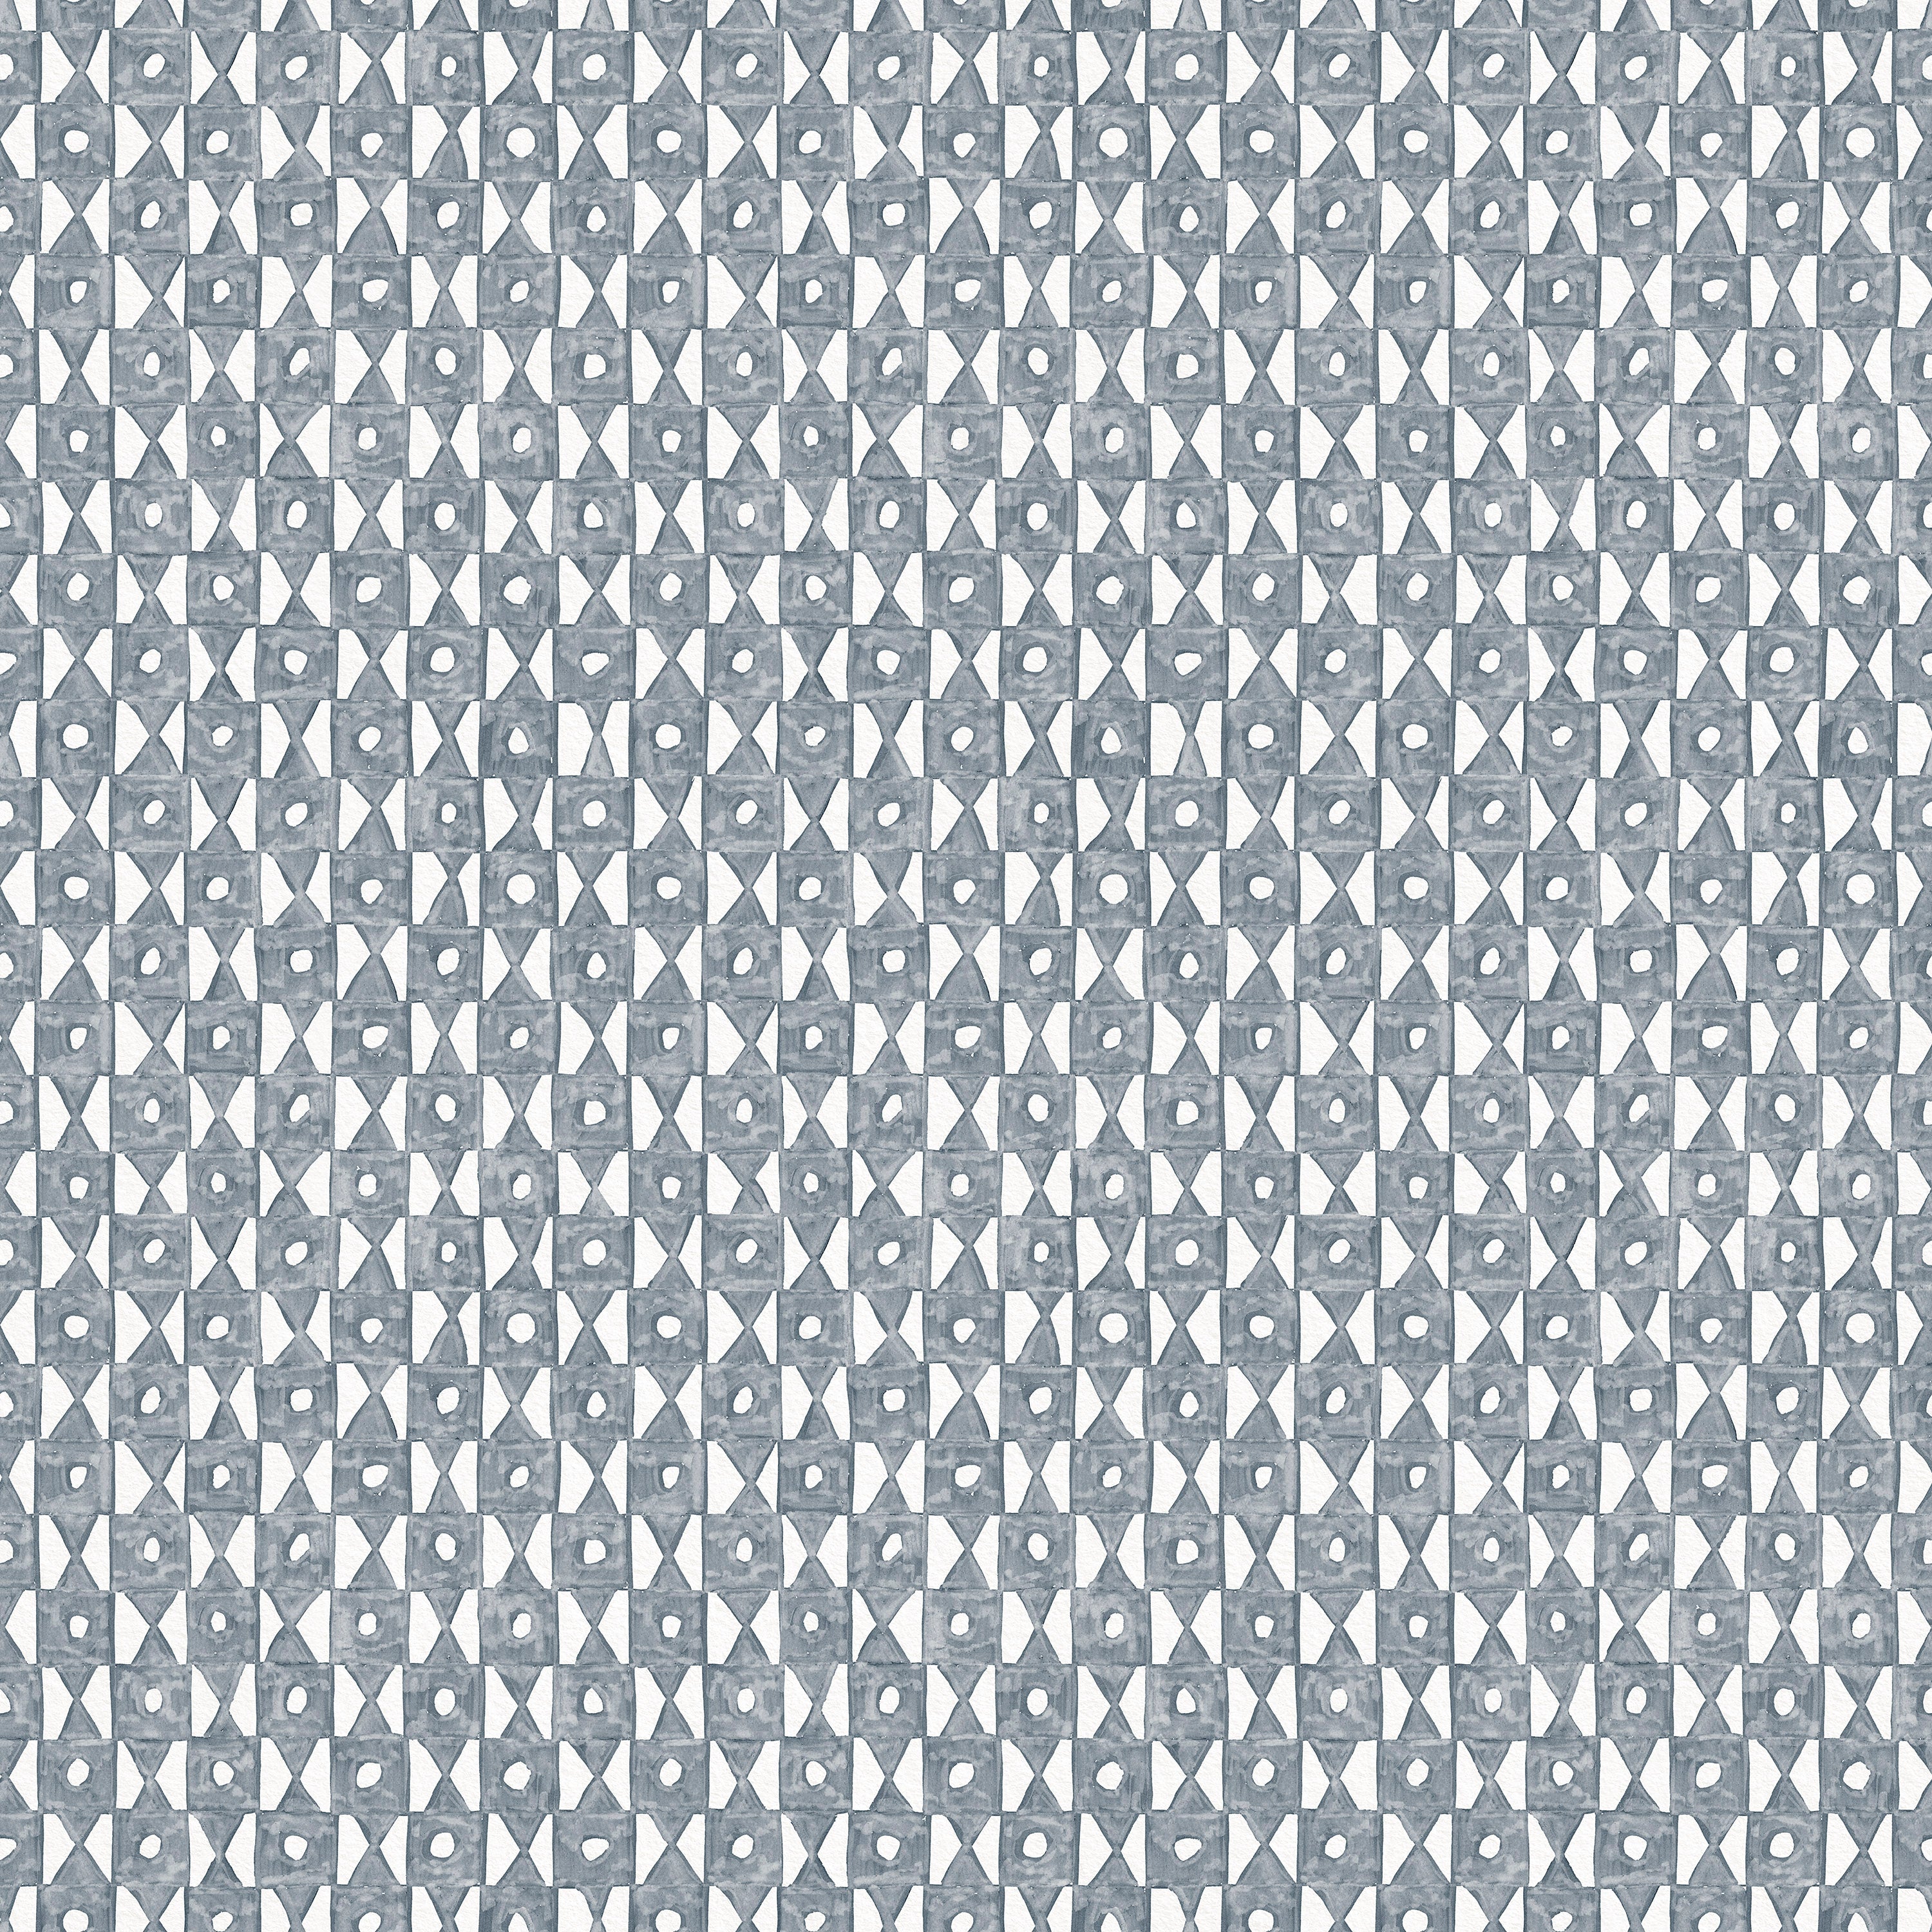 Detail of wallpaper in a geometric grid print in navy on a white field.